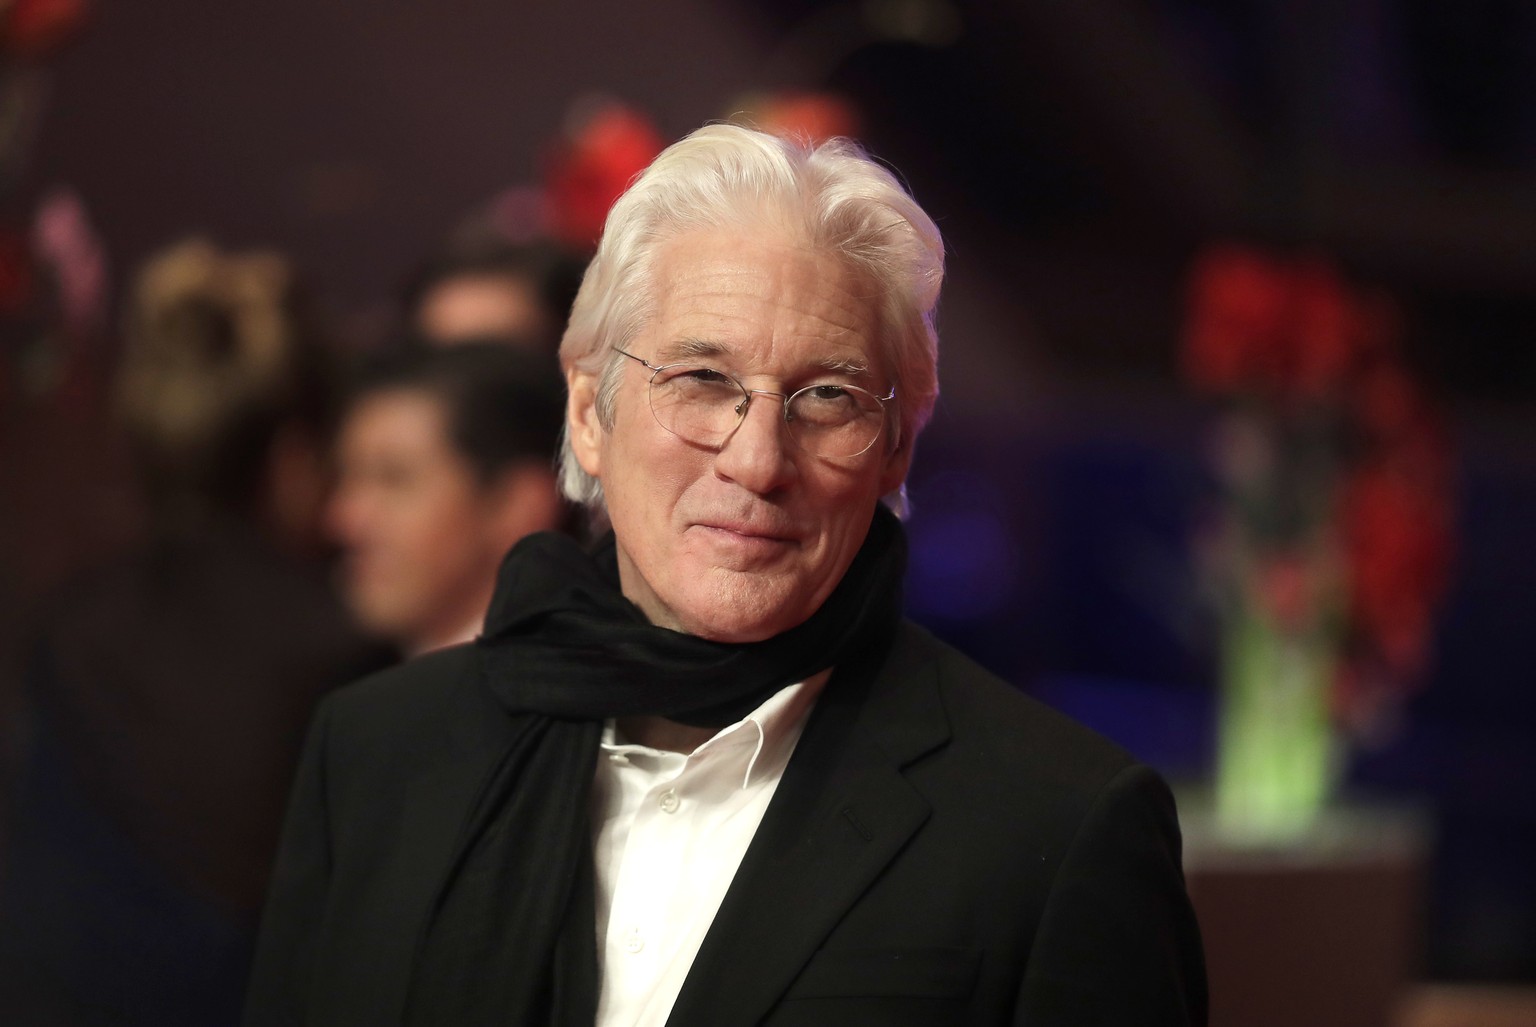 Actor Richard Gere arrives on the red carpet for the film &#039;The Dinner&#039; during the 2017 Berlinale Film Festival in Berlin, Germany, Friday, Feb. 10, 2017. (AP Photo/Markus Schreiber)